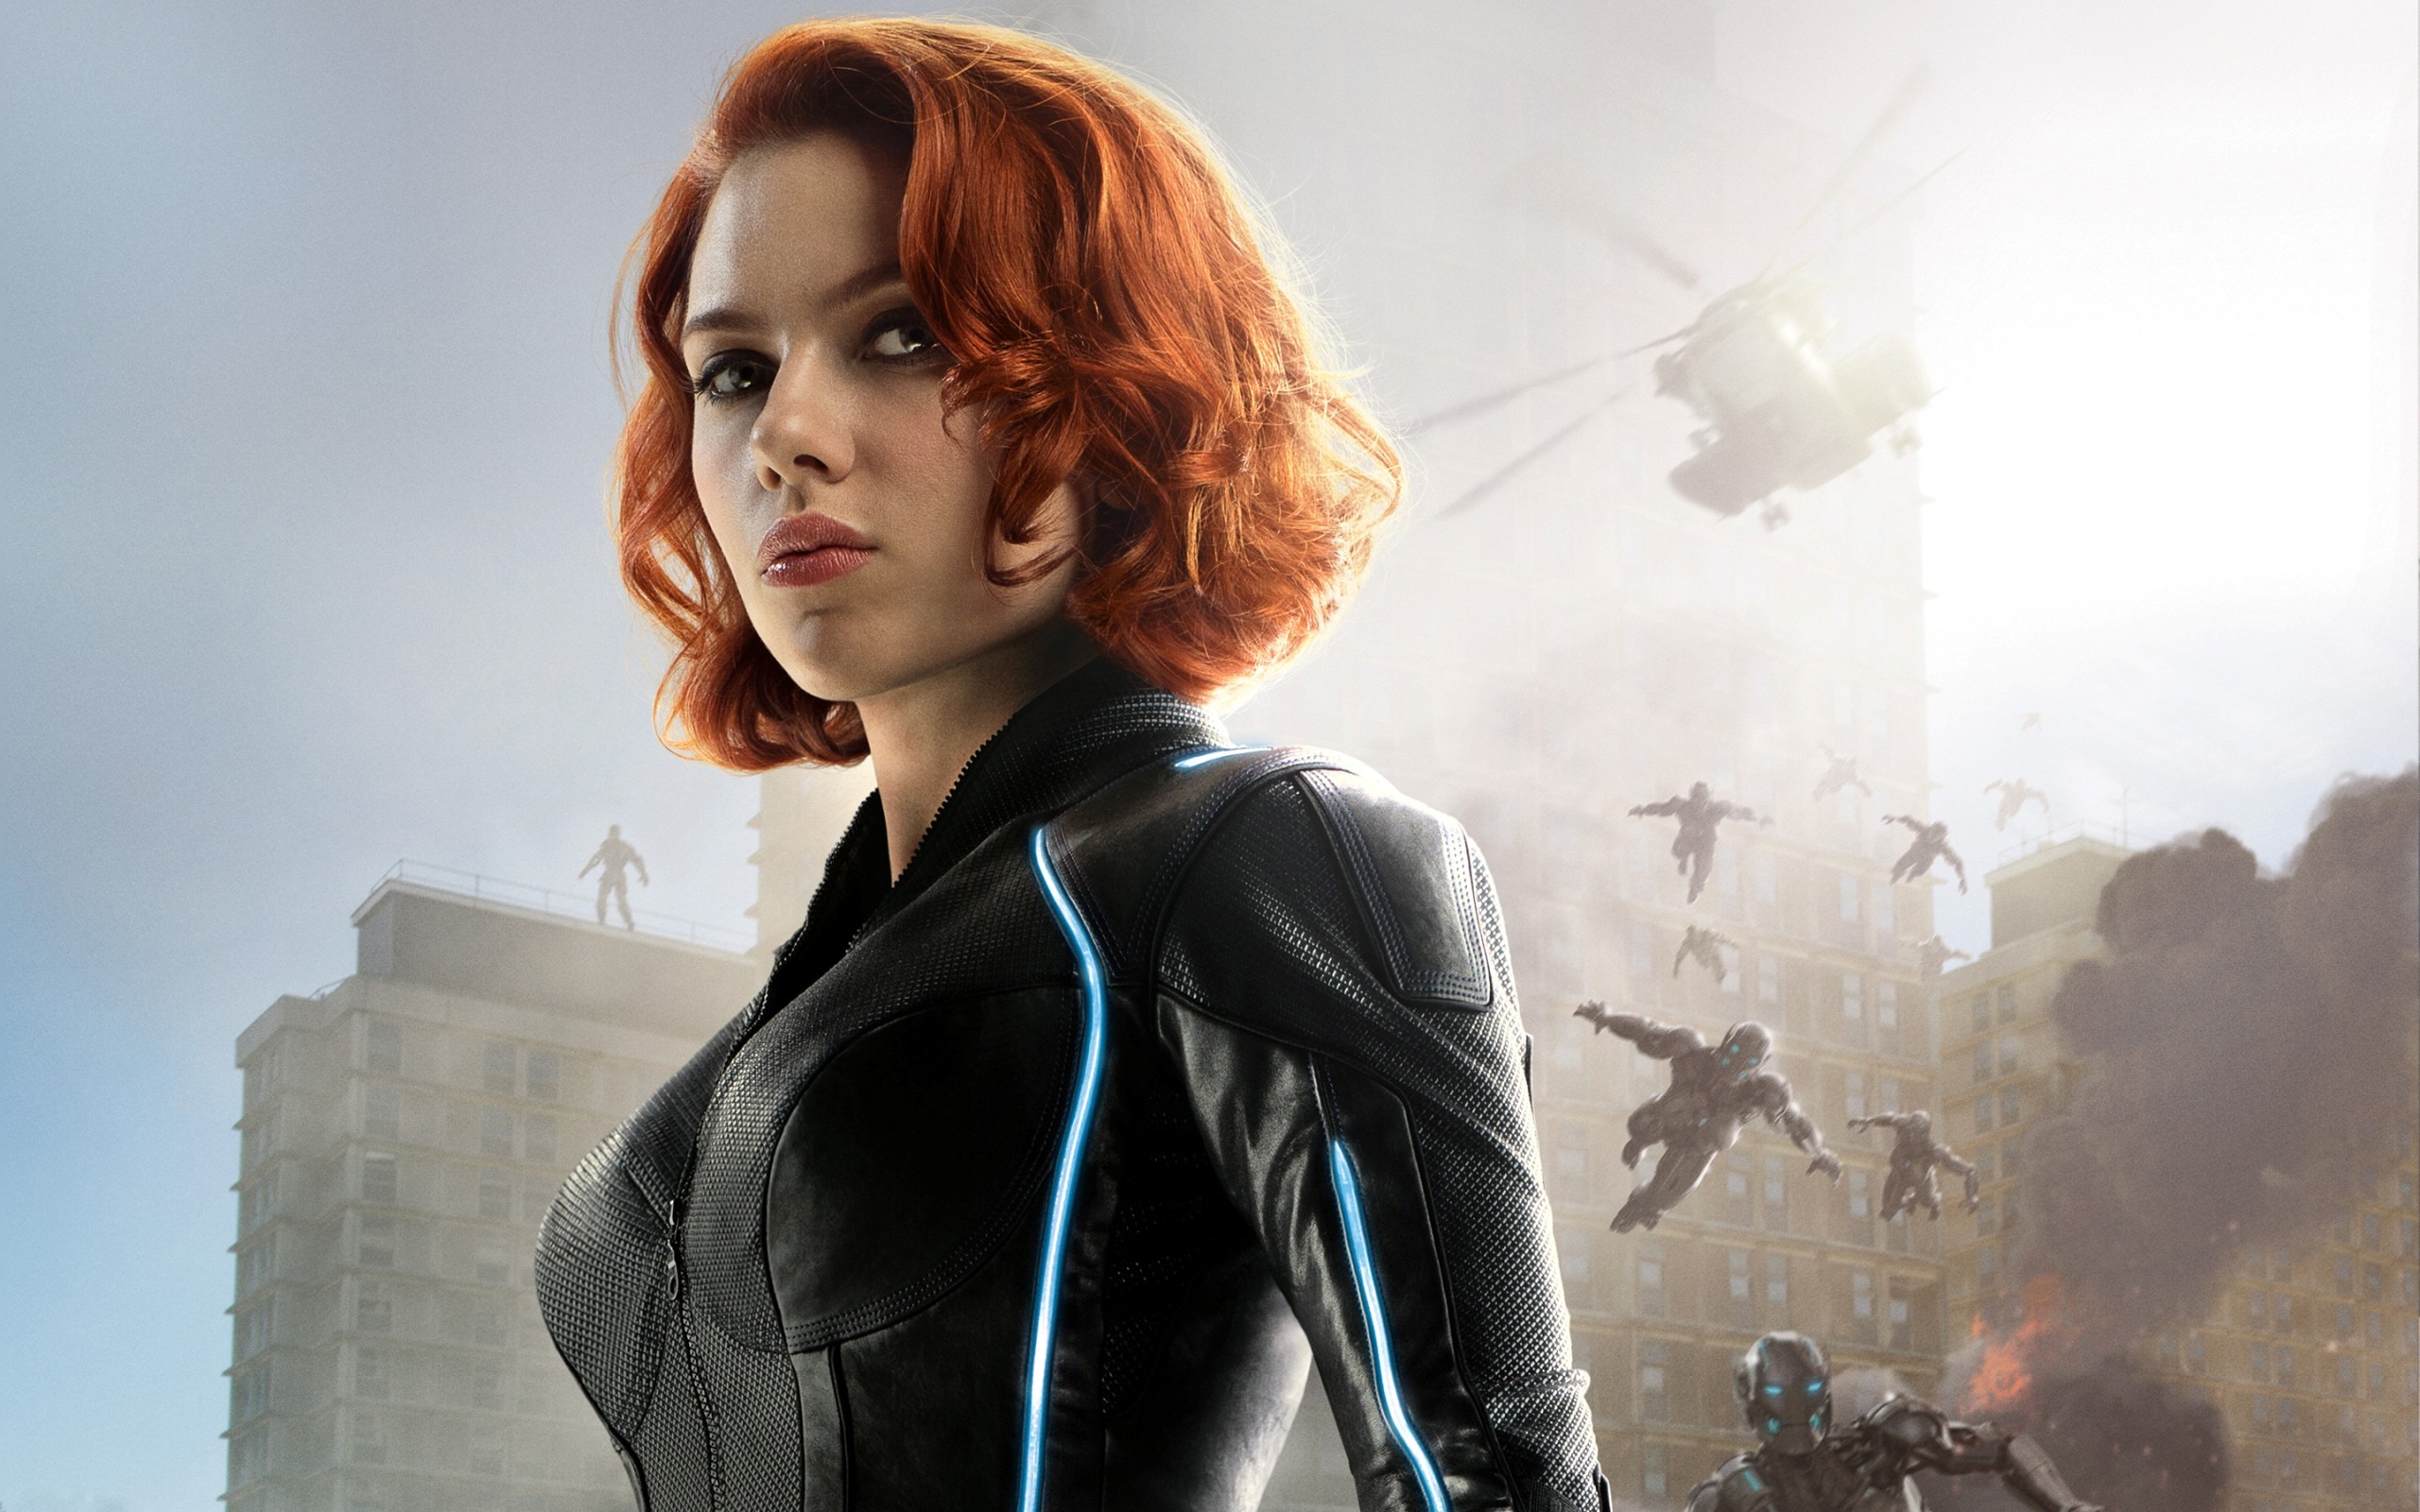 People 2560x1600 women Scarlett Johansson redhead Black Widow The Avengers Avengers: Age of Ultron actress movies Marvel Cinematic Universe Marvel Girl